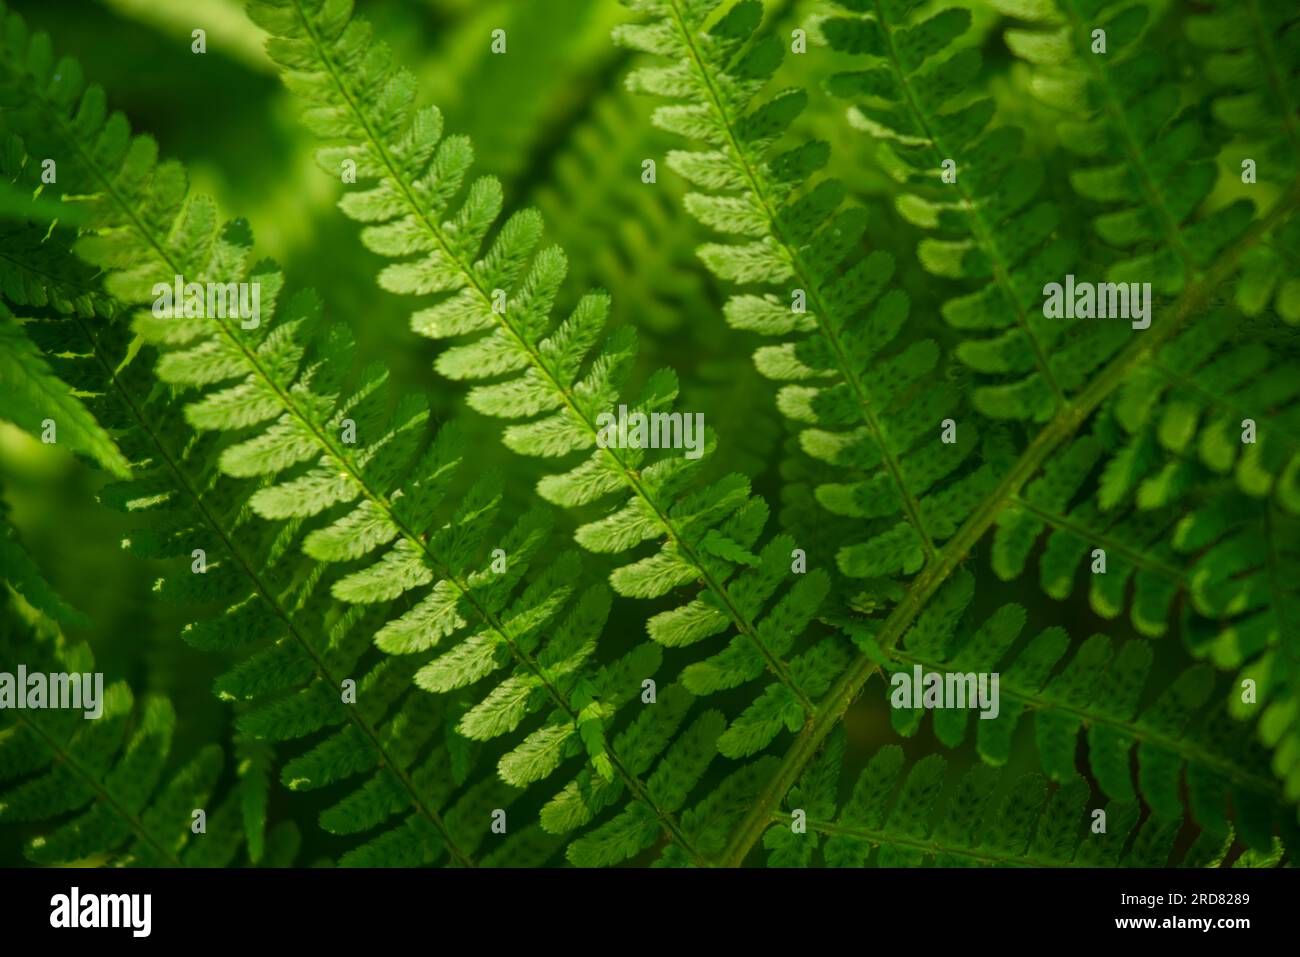 Full frame close-up of a green fern frond, suitable as a natural green background texture Stock Photo